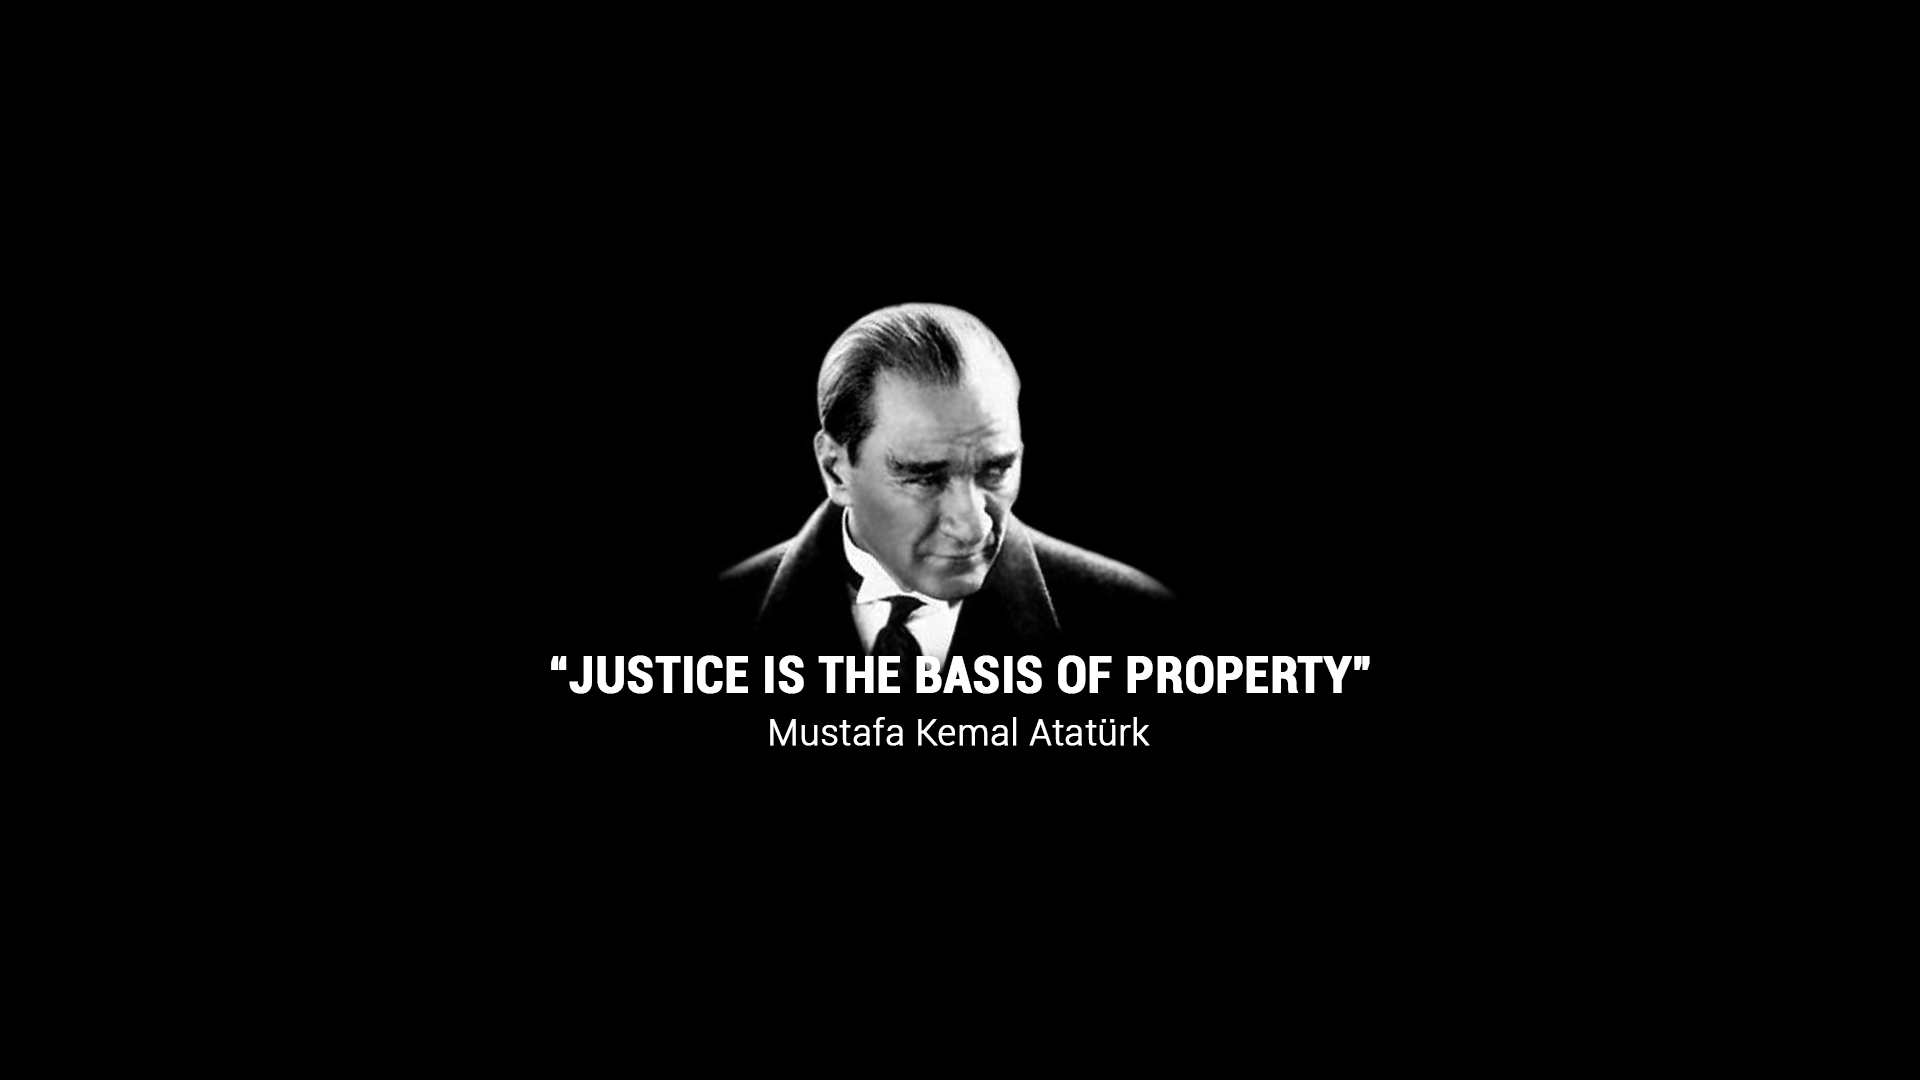 Justice is the basis of property